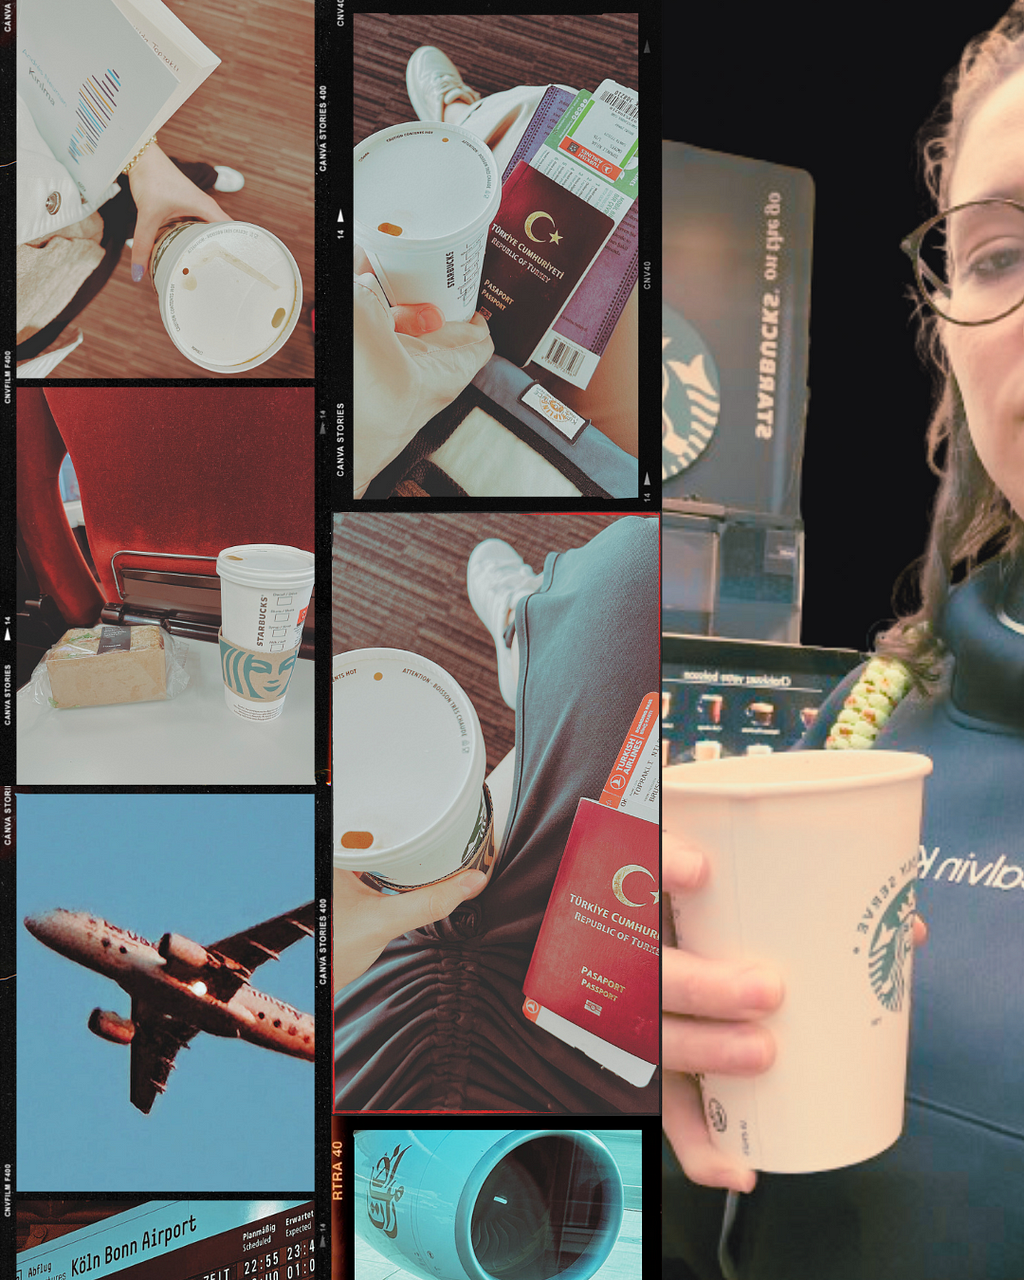 Starbucks coffee while travelling: from different airports and train stations